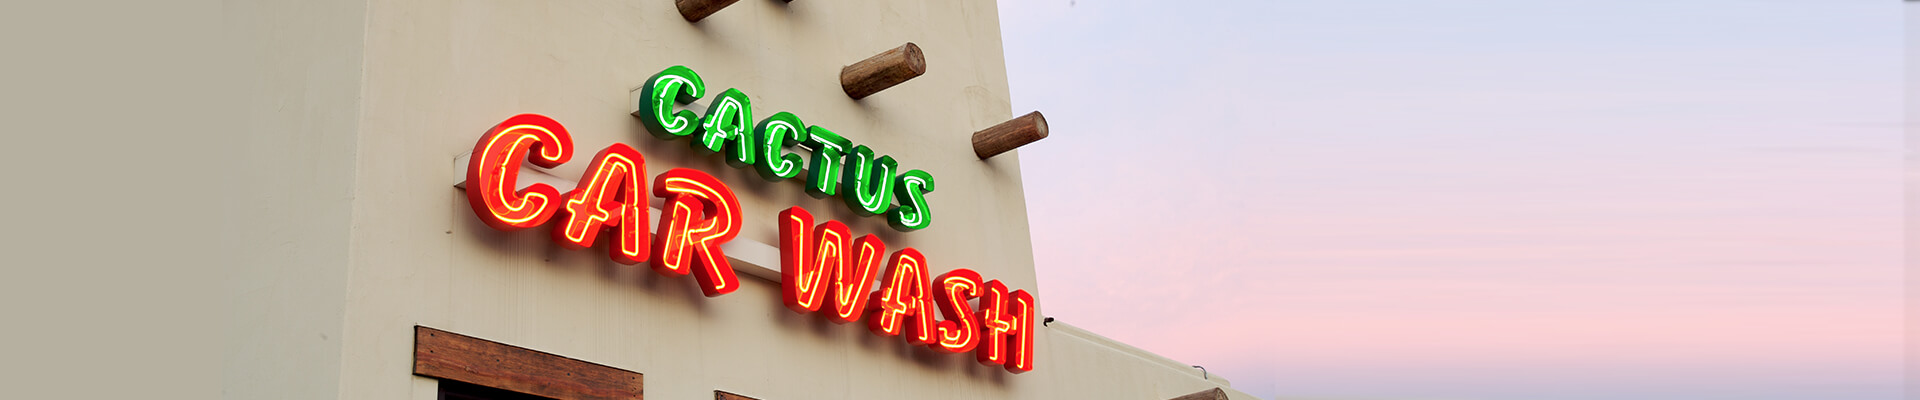 Conserving Water and Using Earth-Friendly Wash Products at Cactus Car Wash